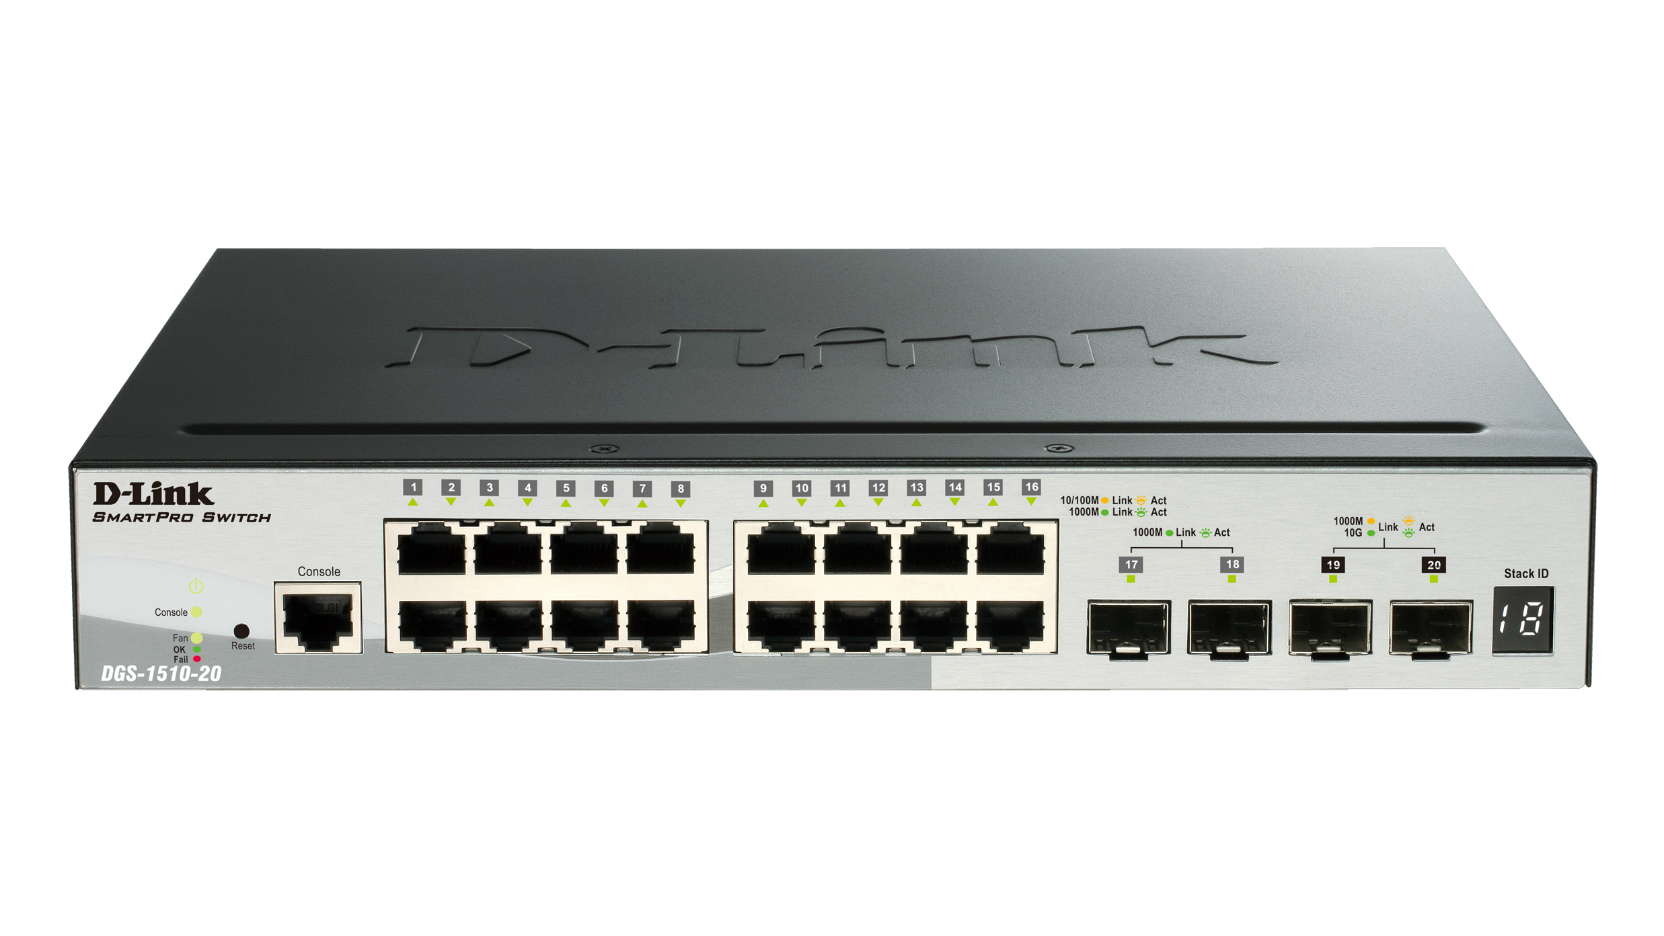 20-Port Gigabit Stackable Smart Managed Switch including 2 10G SFP+ and 2 SFP ports